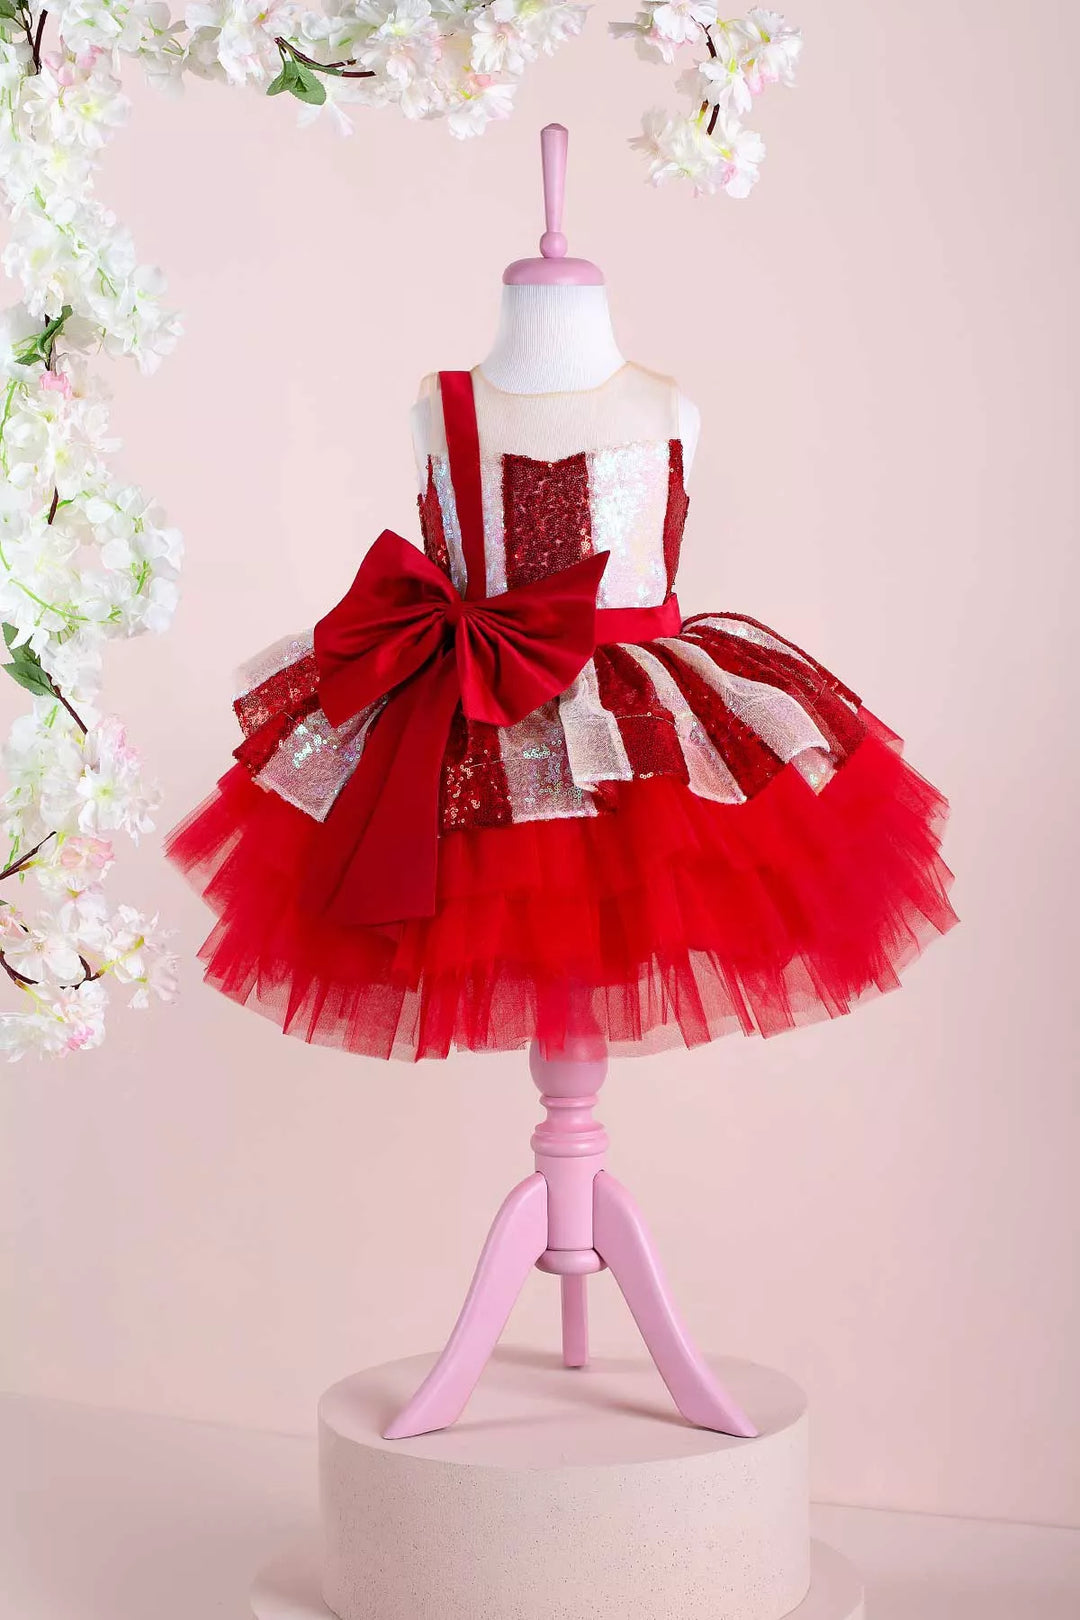 A white and red Christmas dress. The dress has a lined red and white sequin top, a knee length red skirt, red ribbon. The skirt is made of layers of red tulle